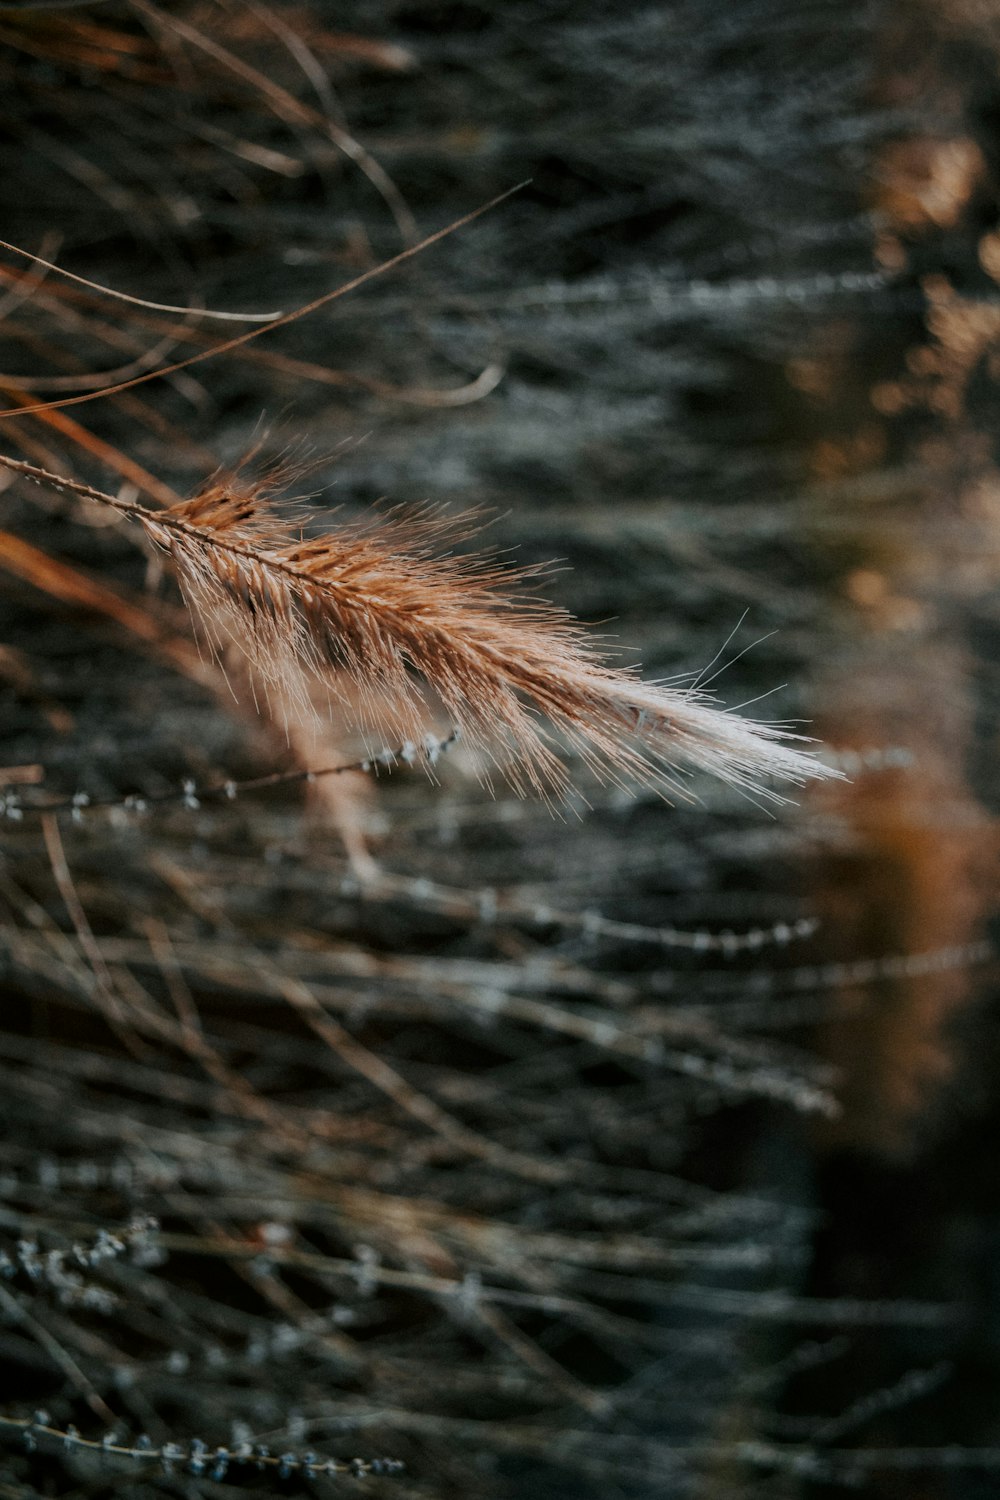 a close up of a feather on a branch